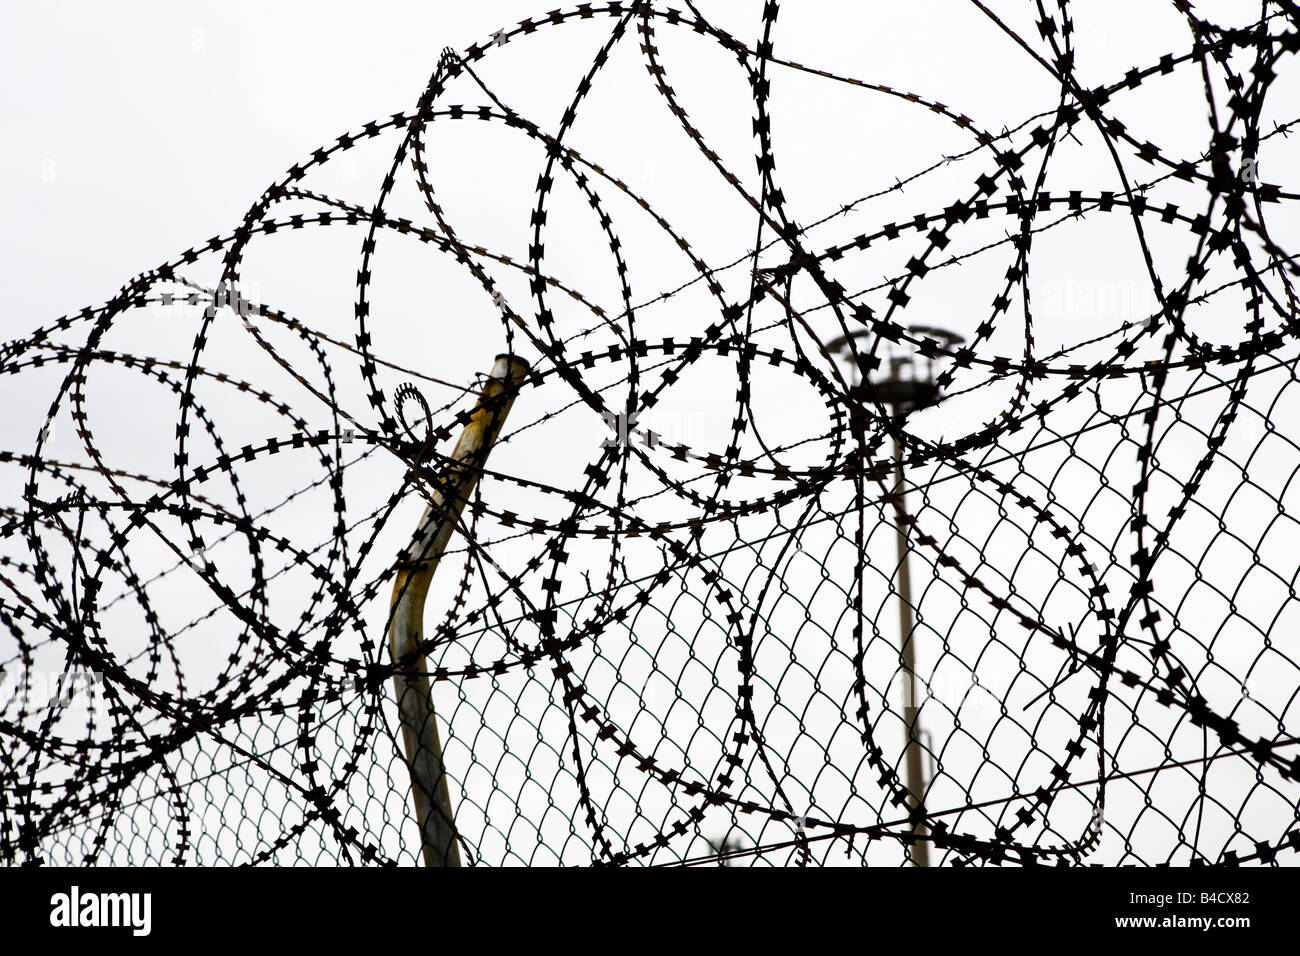 Razor wire and fence silhouette UK Stock Photo